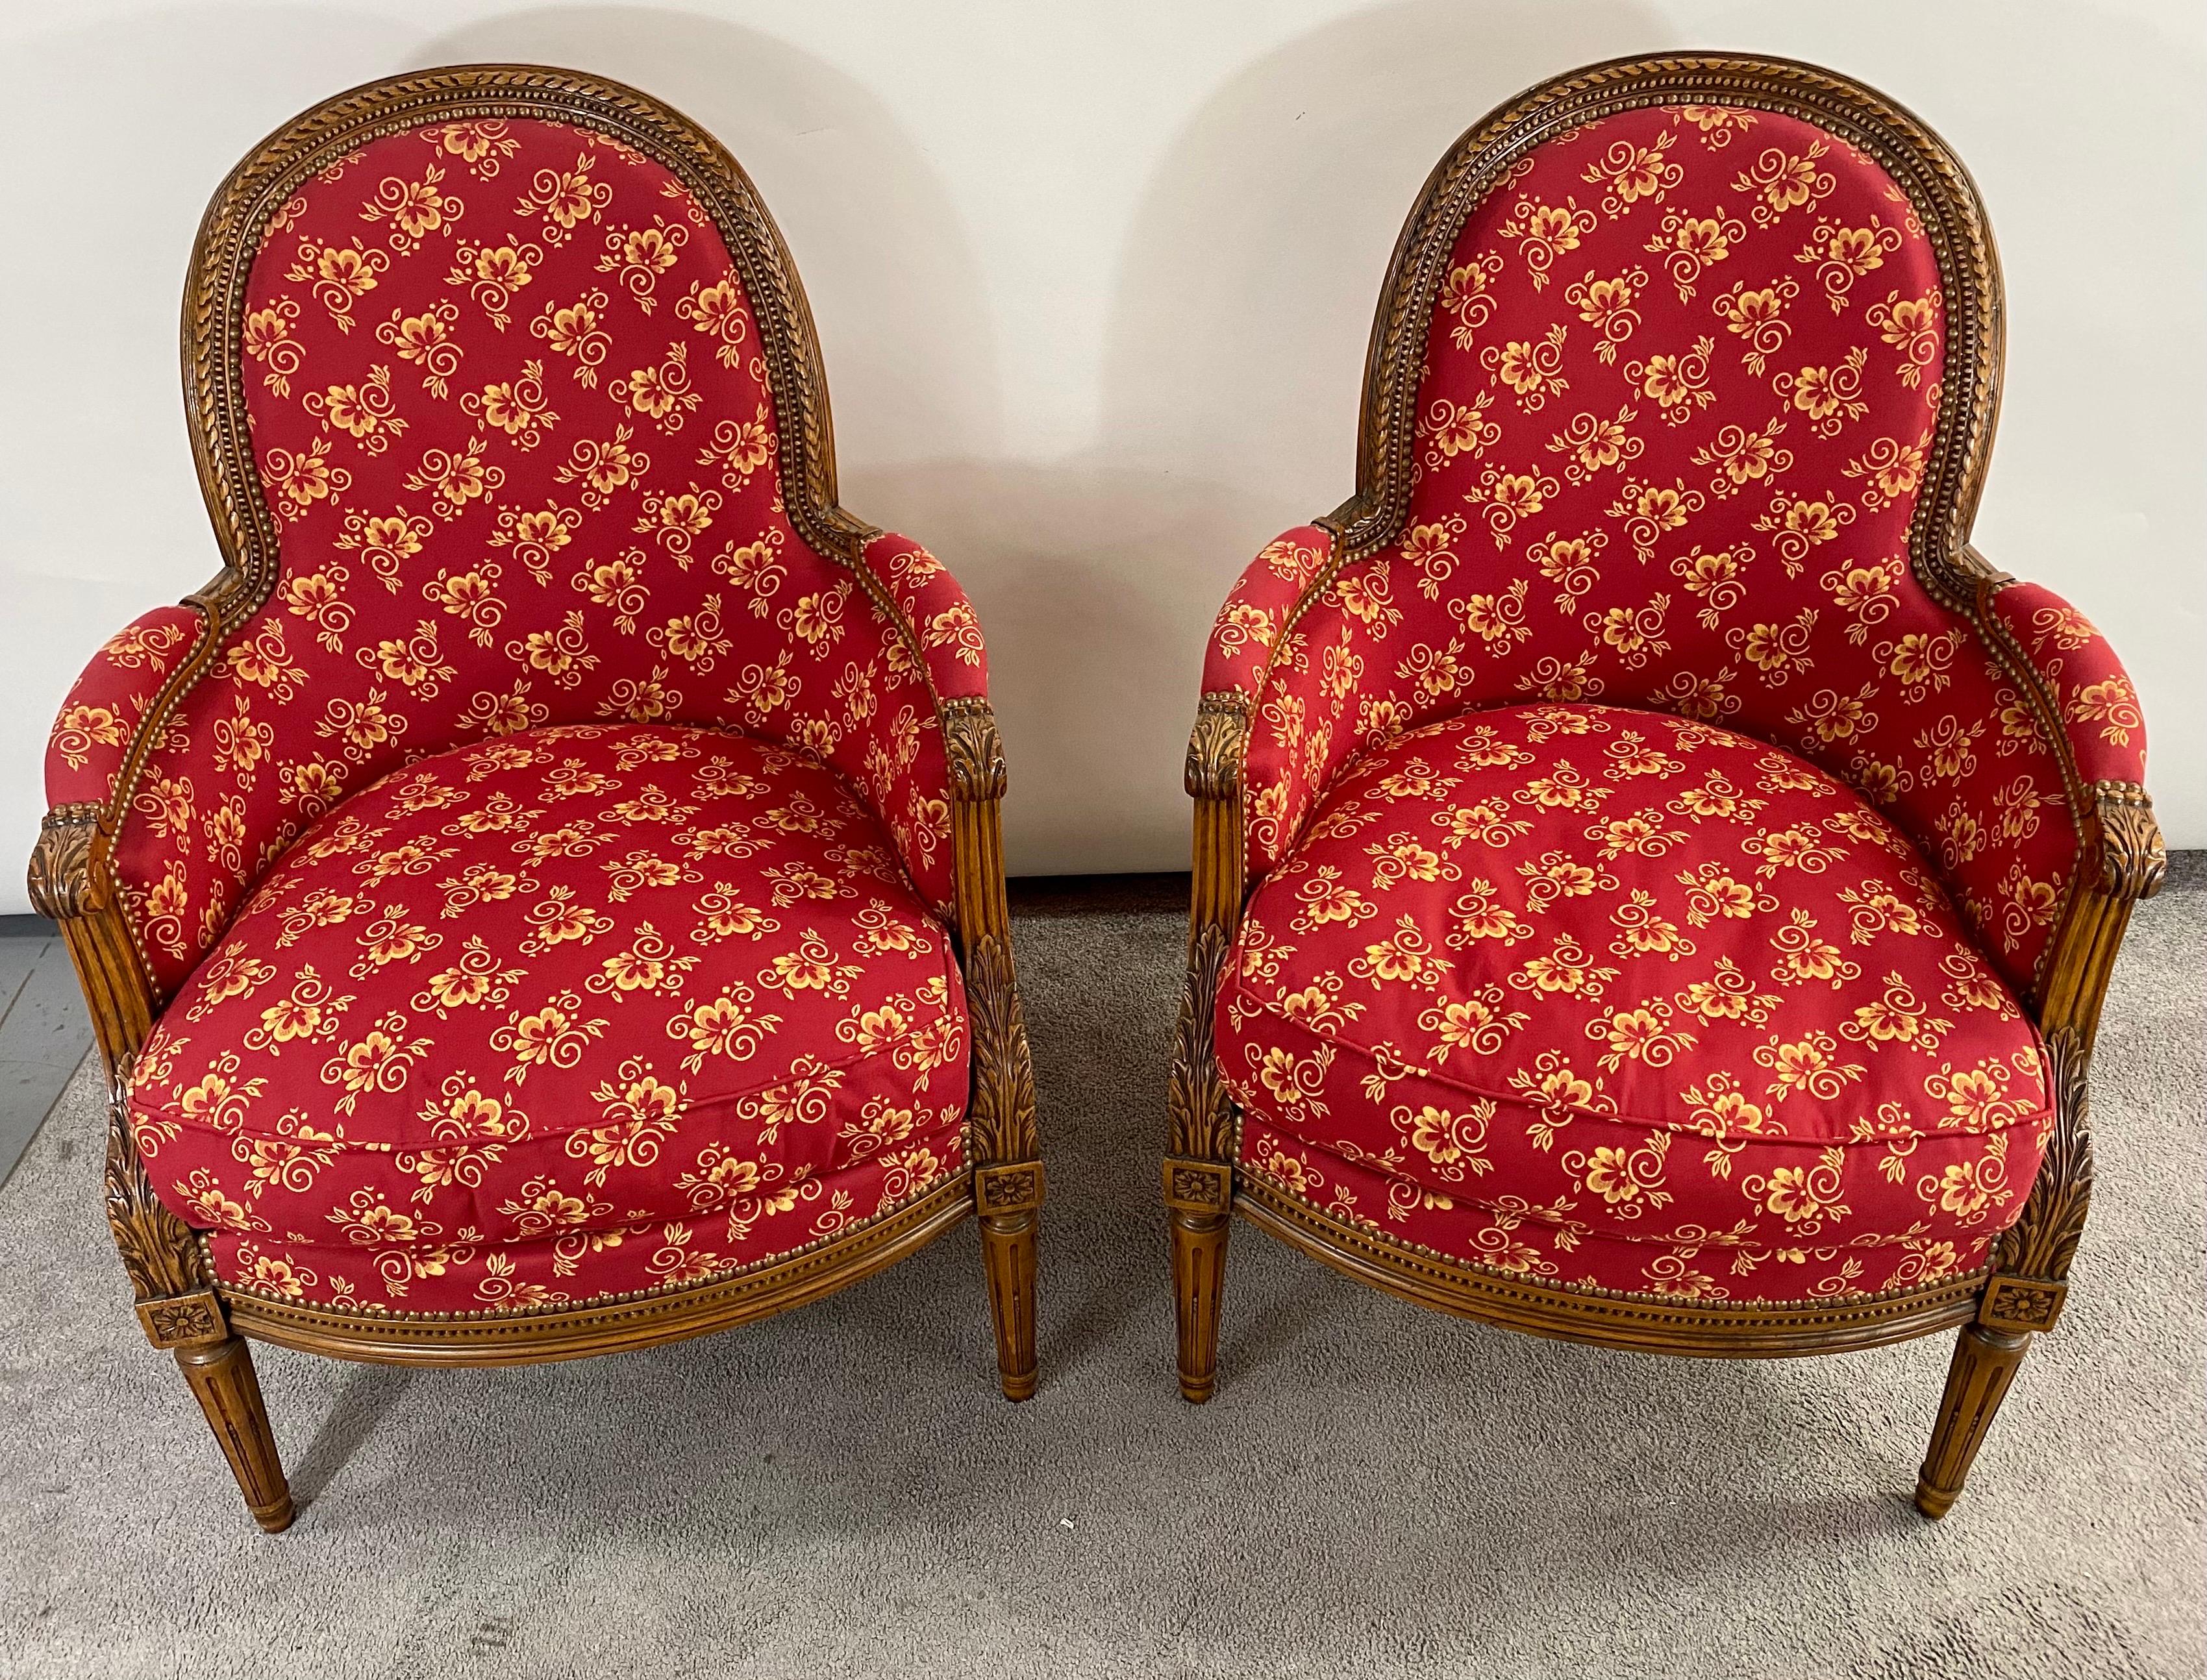 An exquisite pair of French Louis XVI style bergere armchairs probably made around late 19th century, early 20 century. The frame of the chairs is hand carved of quality walnut wood showing fine carving details of acanthus and flowers. the bergere